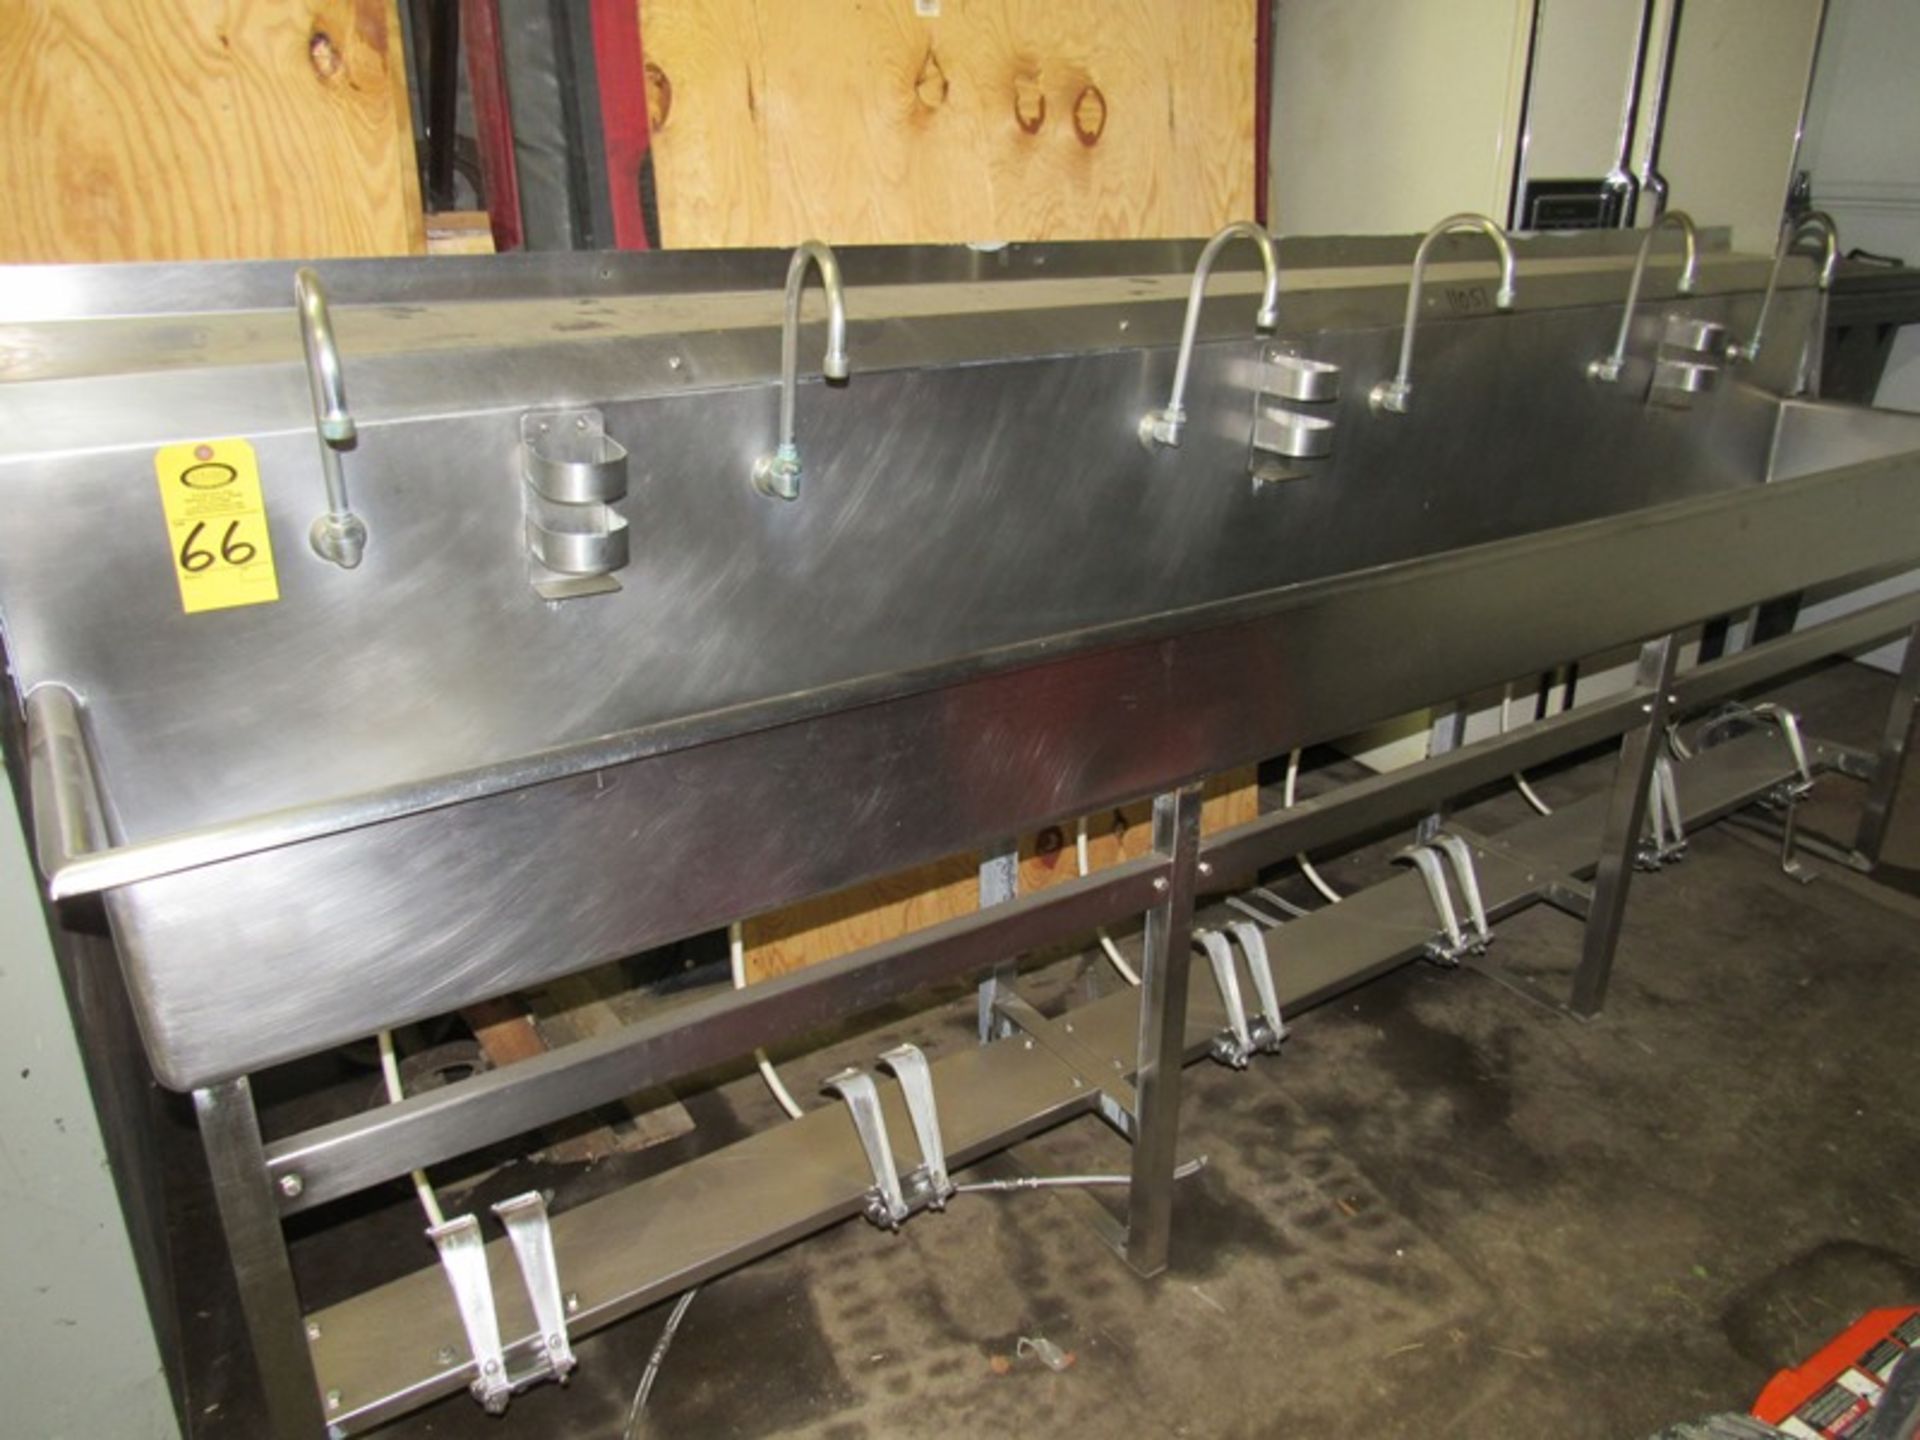 Stainless Steel Sink, 24" W X 10' L, 6 faucets, foot pedal activation, 3 soap holders